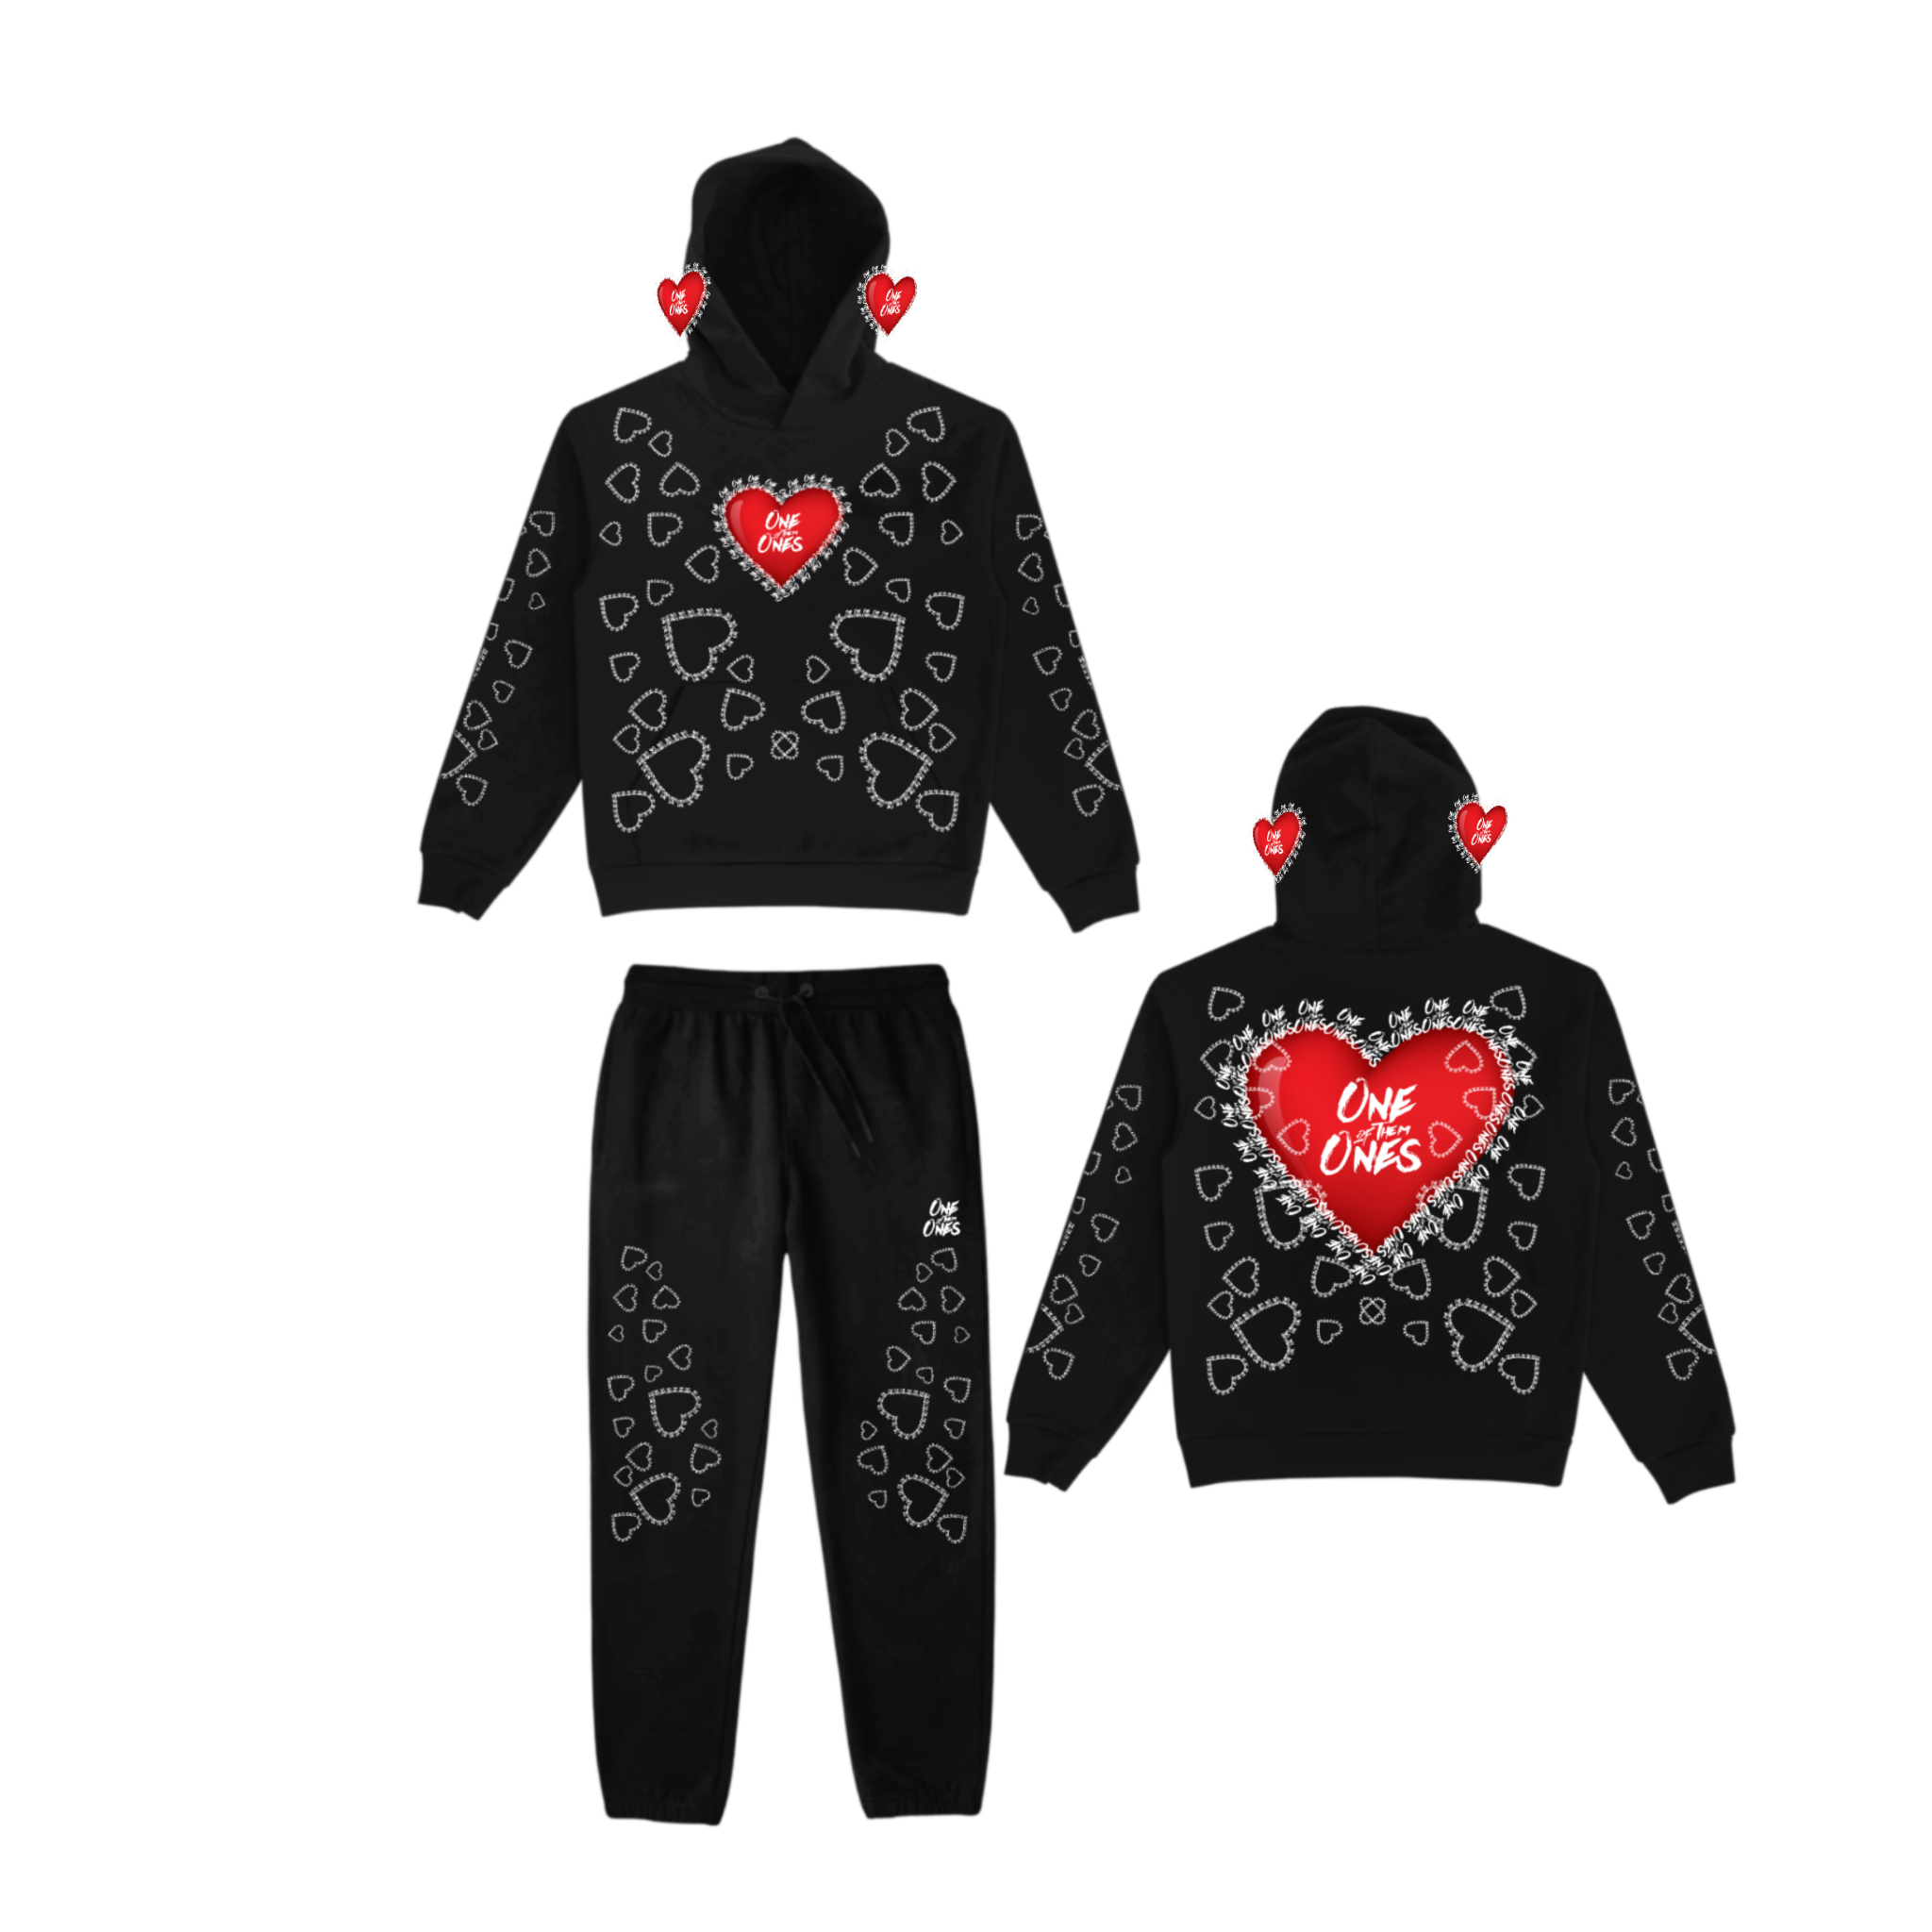 One Of Them Ones - One Love Hoodie Set